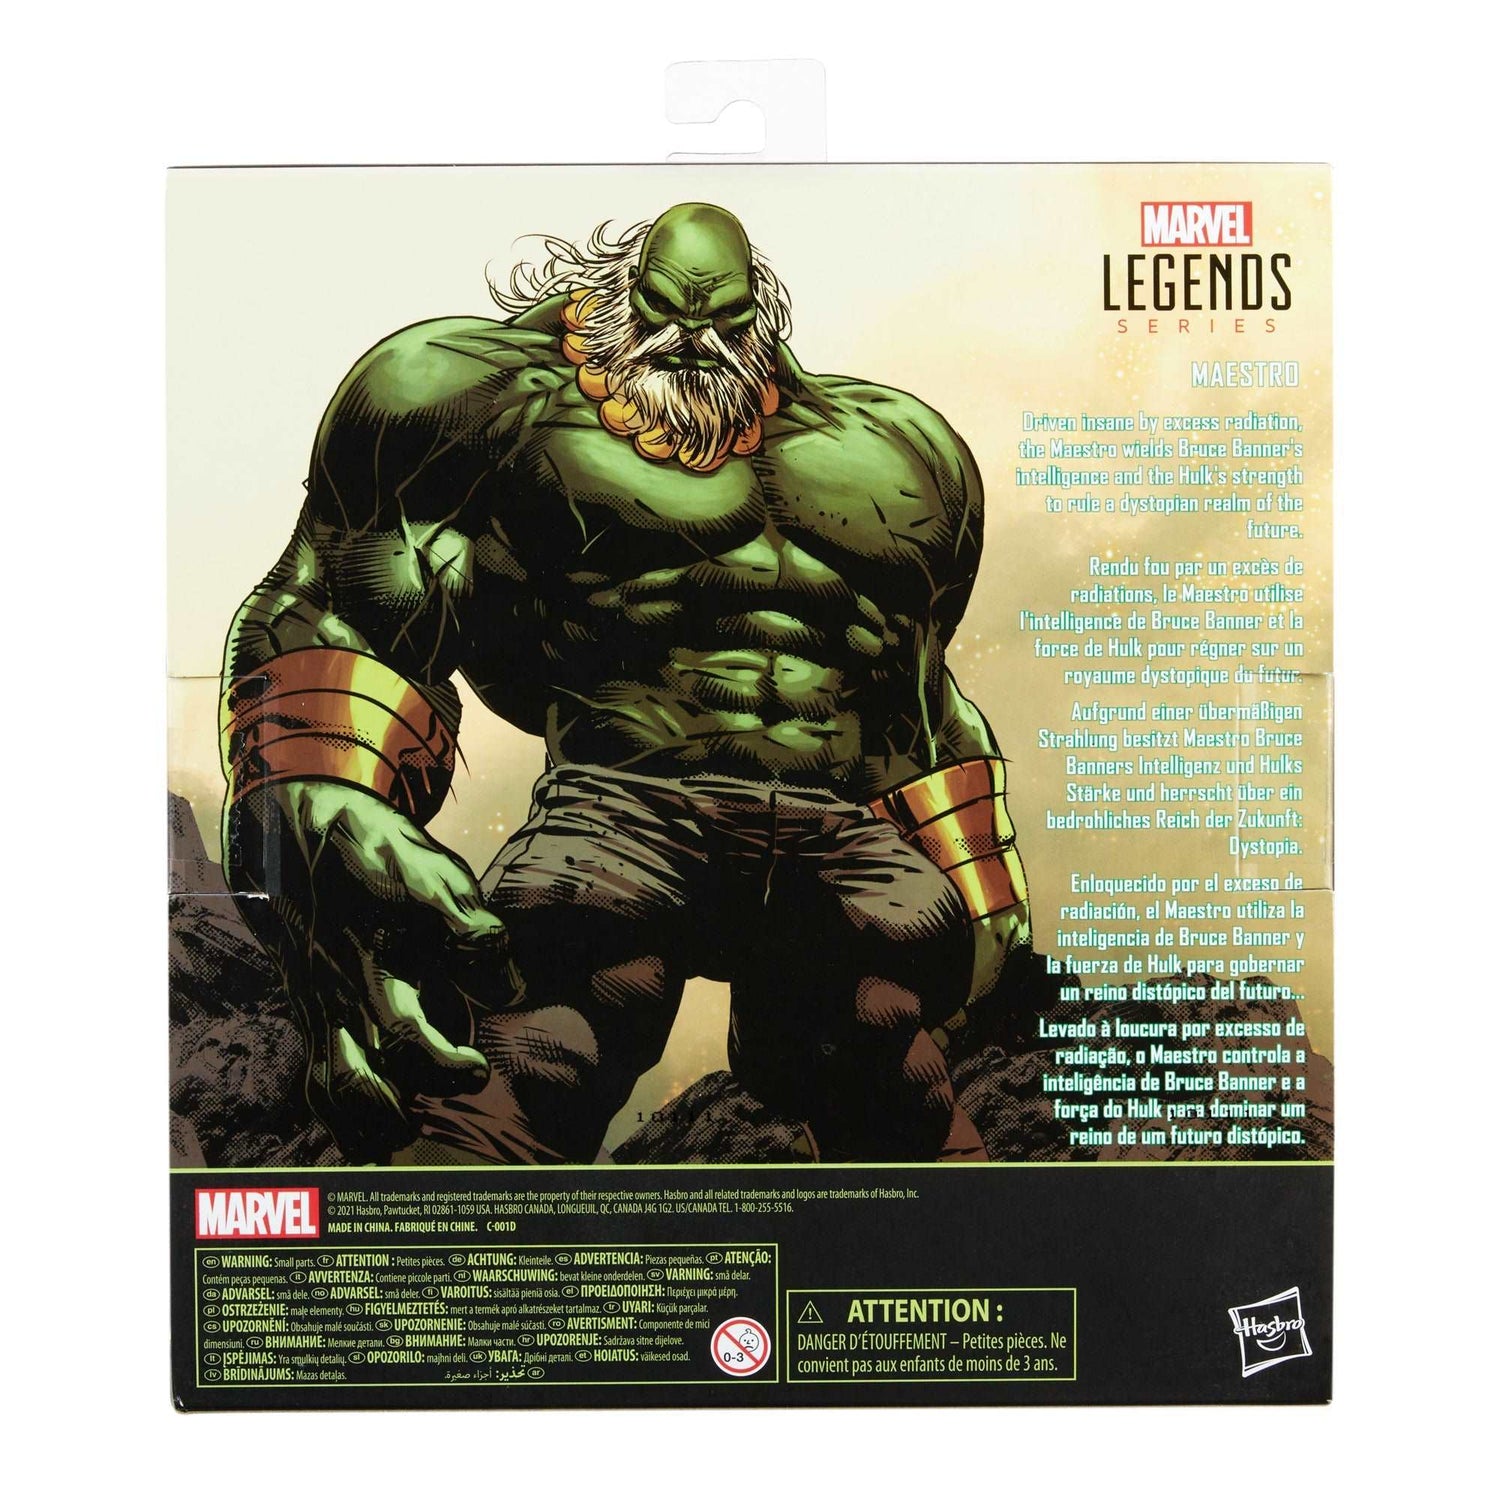 Marvel Legends Deluxe Maestro action figure back of box packaging